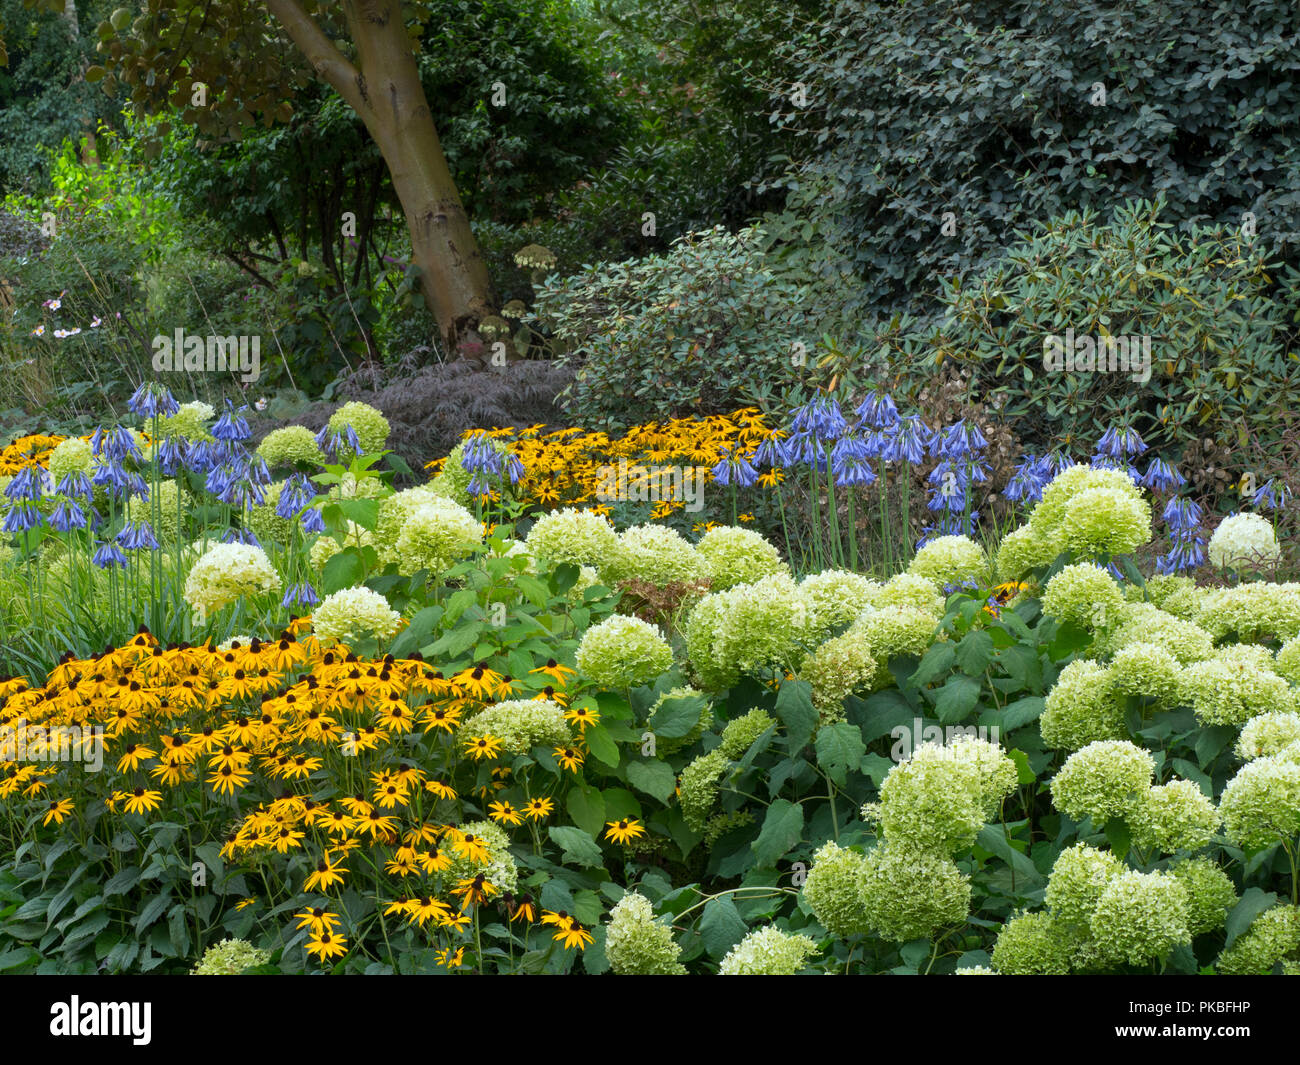 Blue agapanthus'Loch hope,Hydrangea arborescens,and Rudbeckia Gold sturm in woodland garden Stock Photo